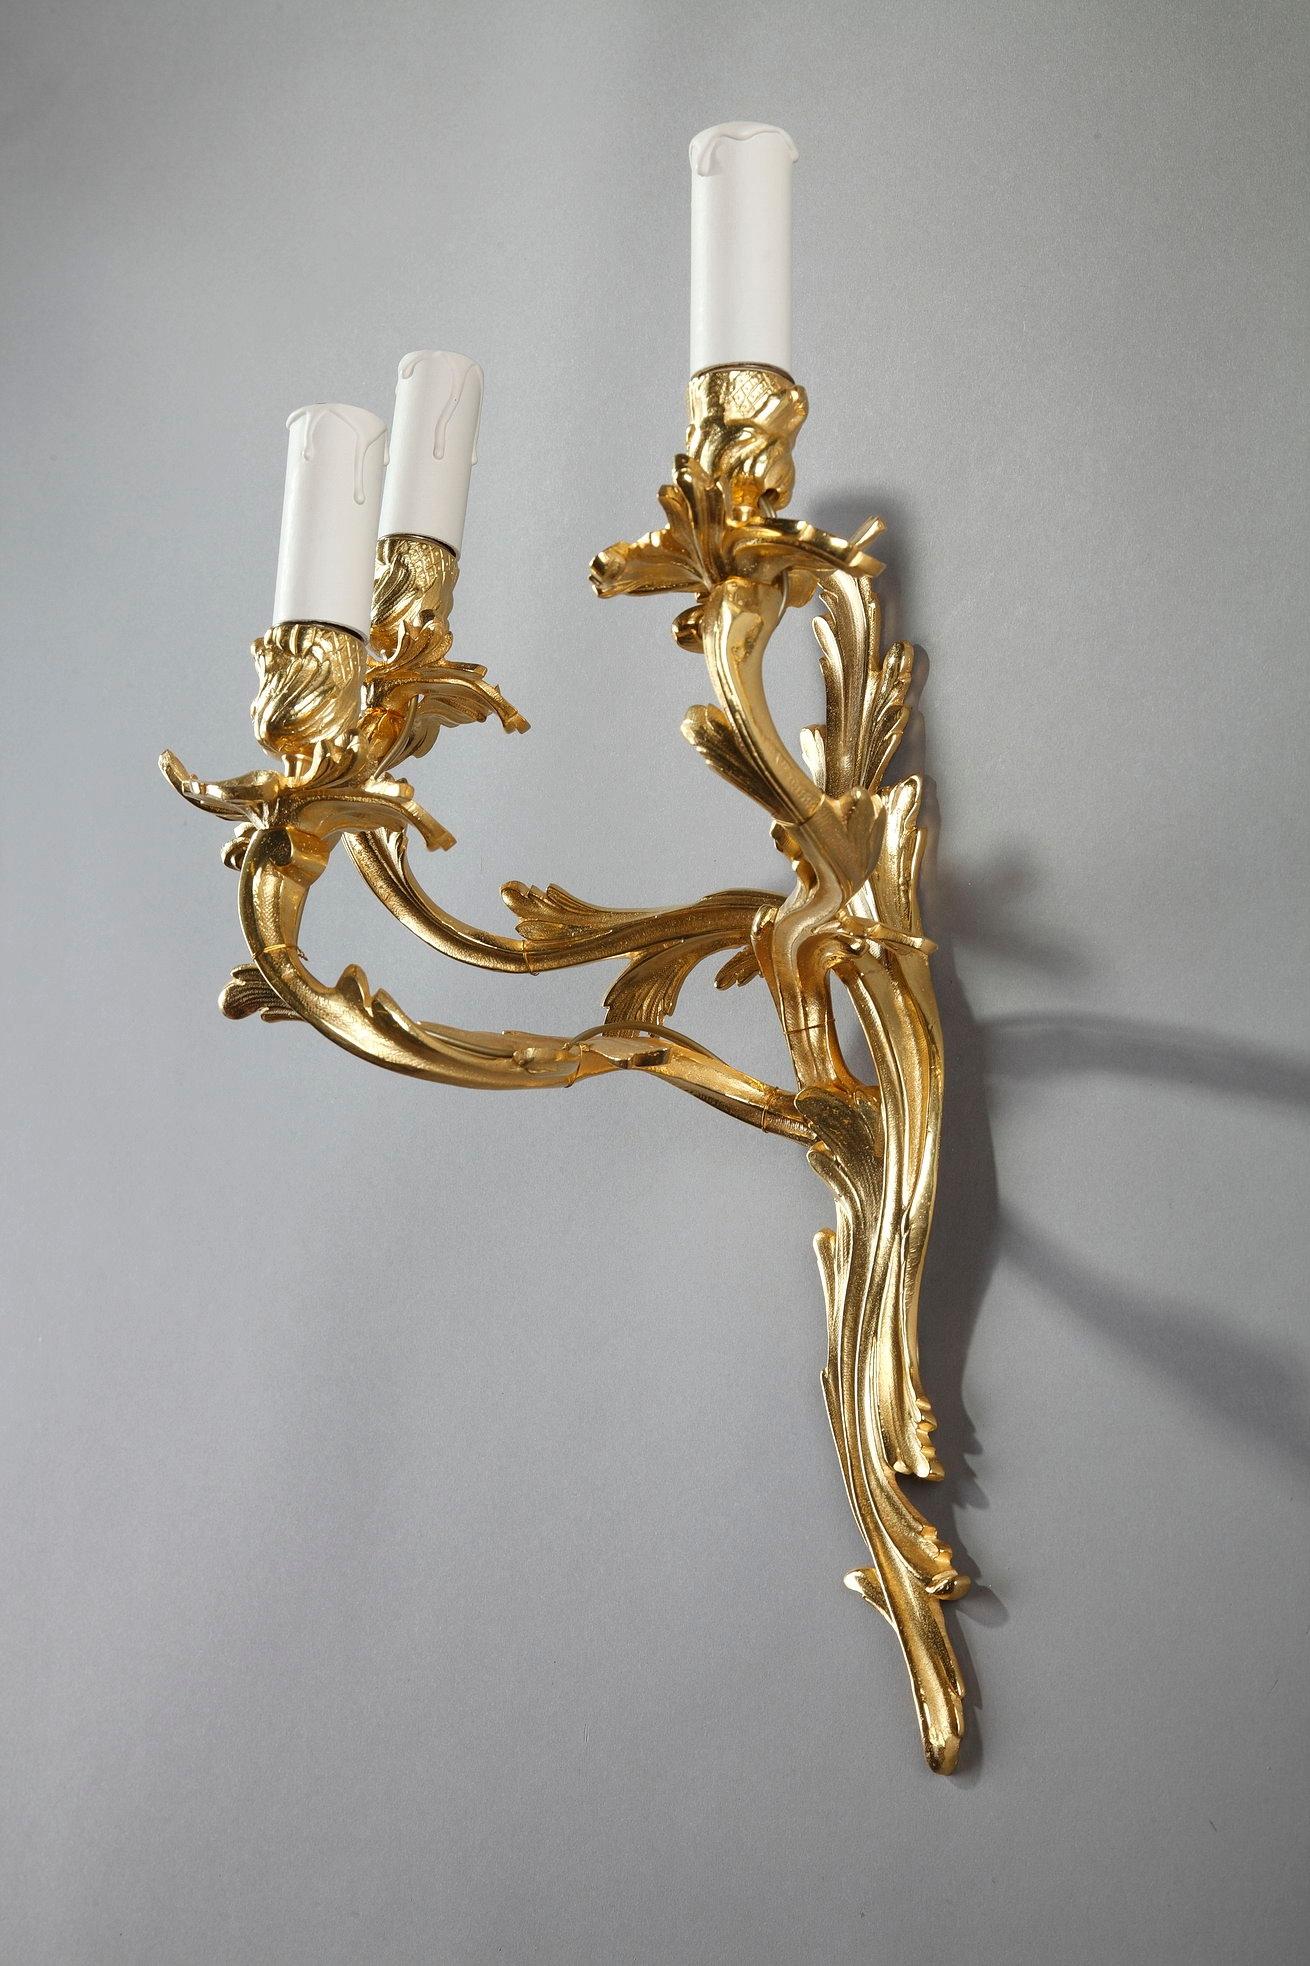 Bronze Late 19th Century Pair of French Wall Sconces in Louis XV Style